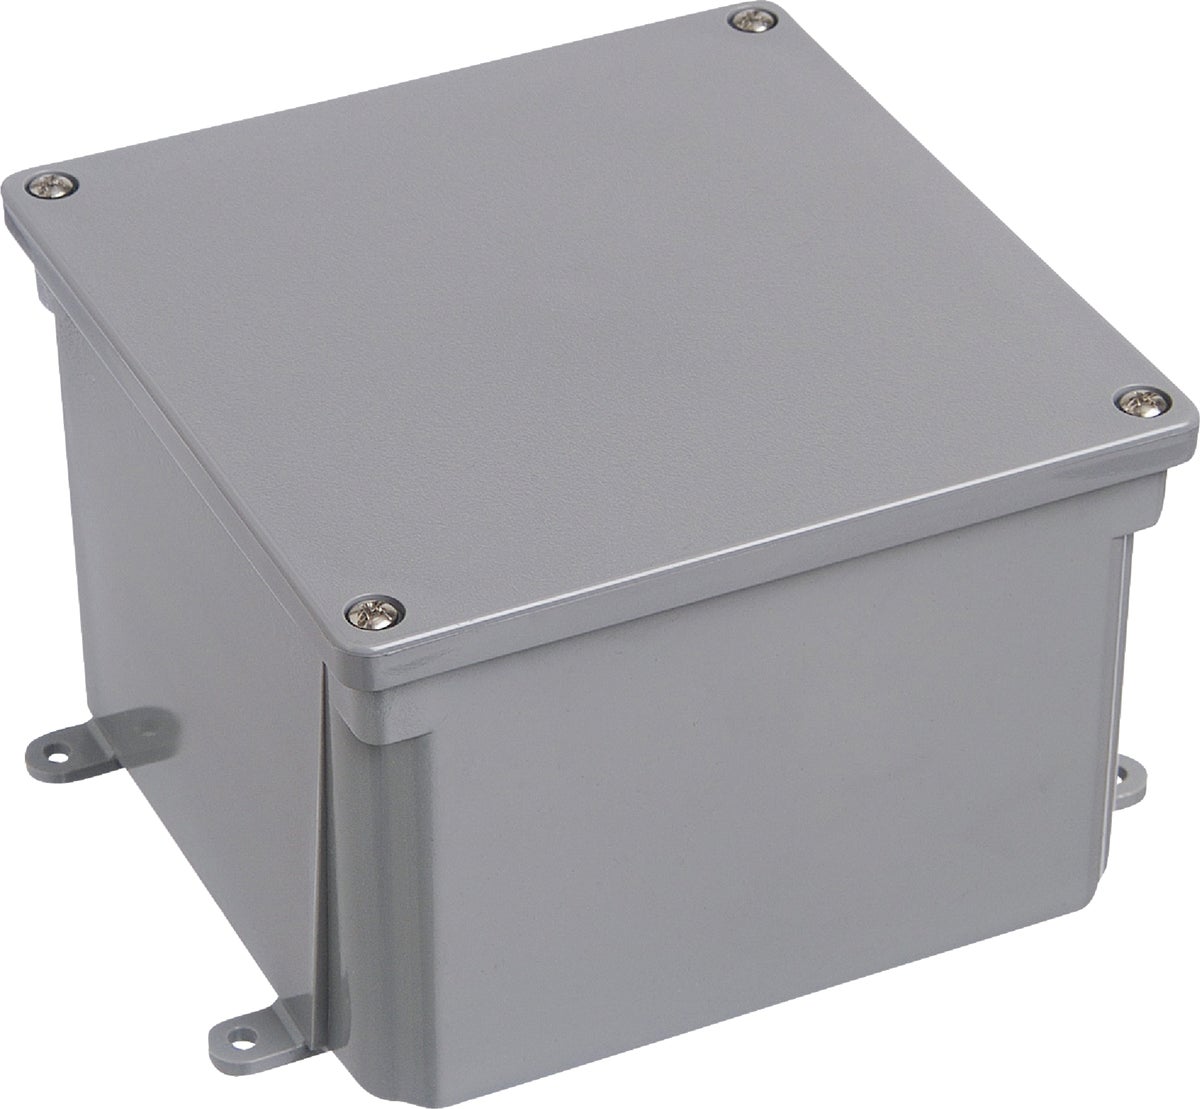 PVC (polyvinyl chloride) junction box with cover. 